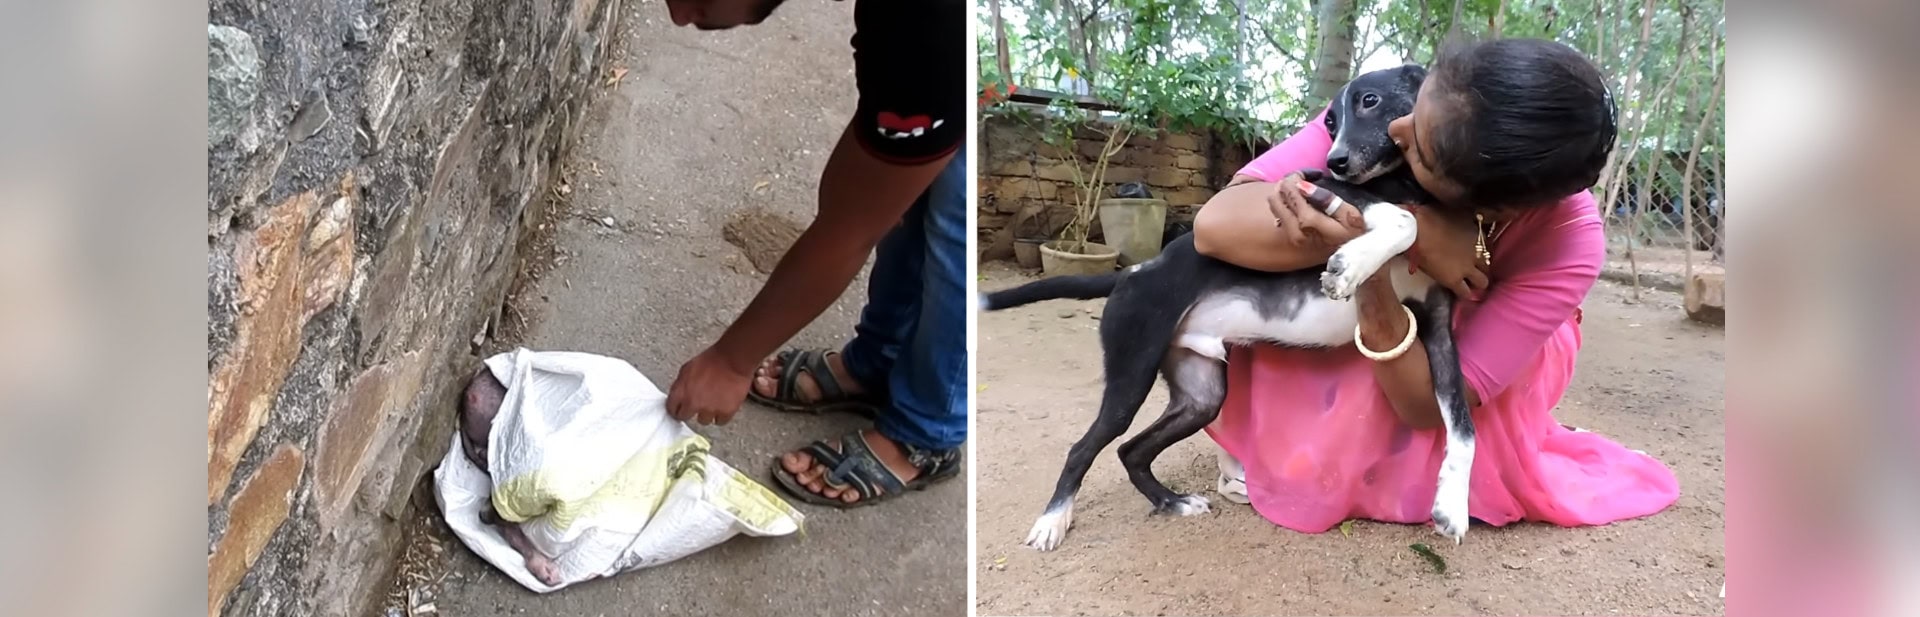 Injured Puppy Rescued From A Discarded Plastic Bag Goes Through Inspiring Change